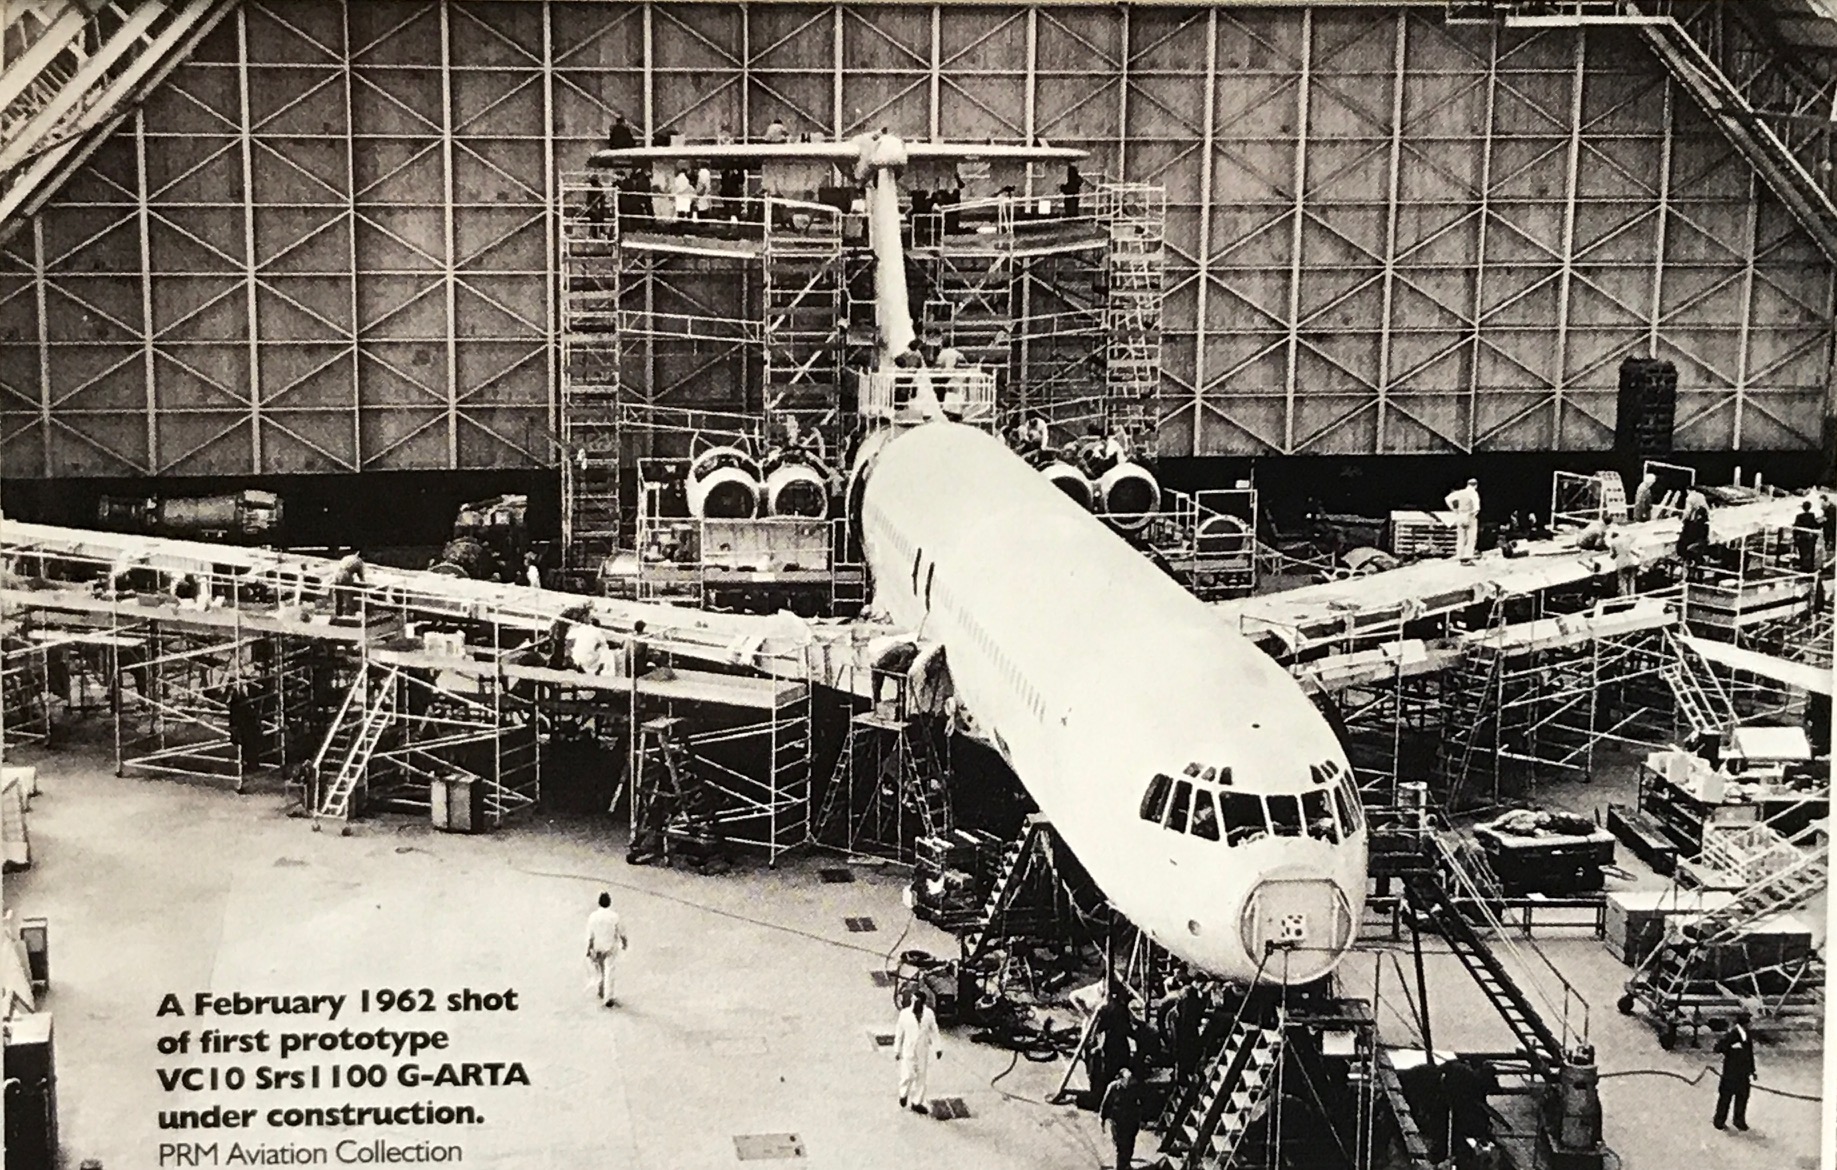 Brooklands: A February 1962 shot of the first prototype VC10 Srs1 100 G-ARTA under construction.